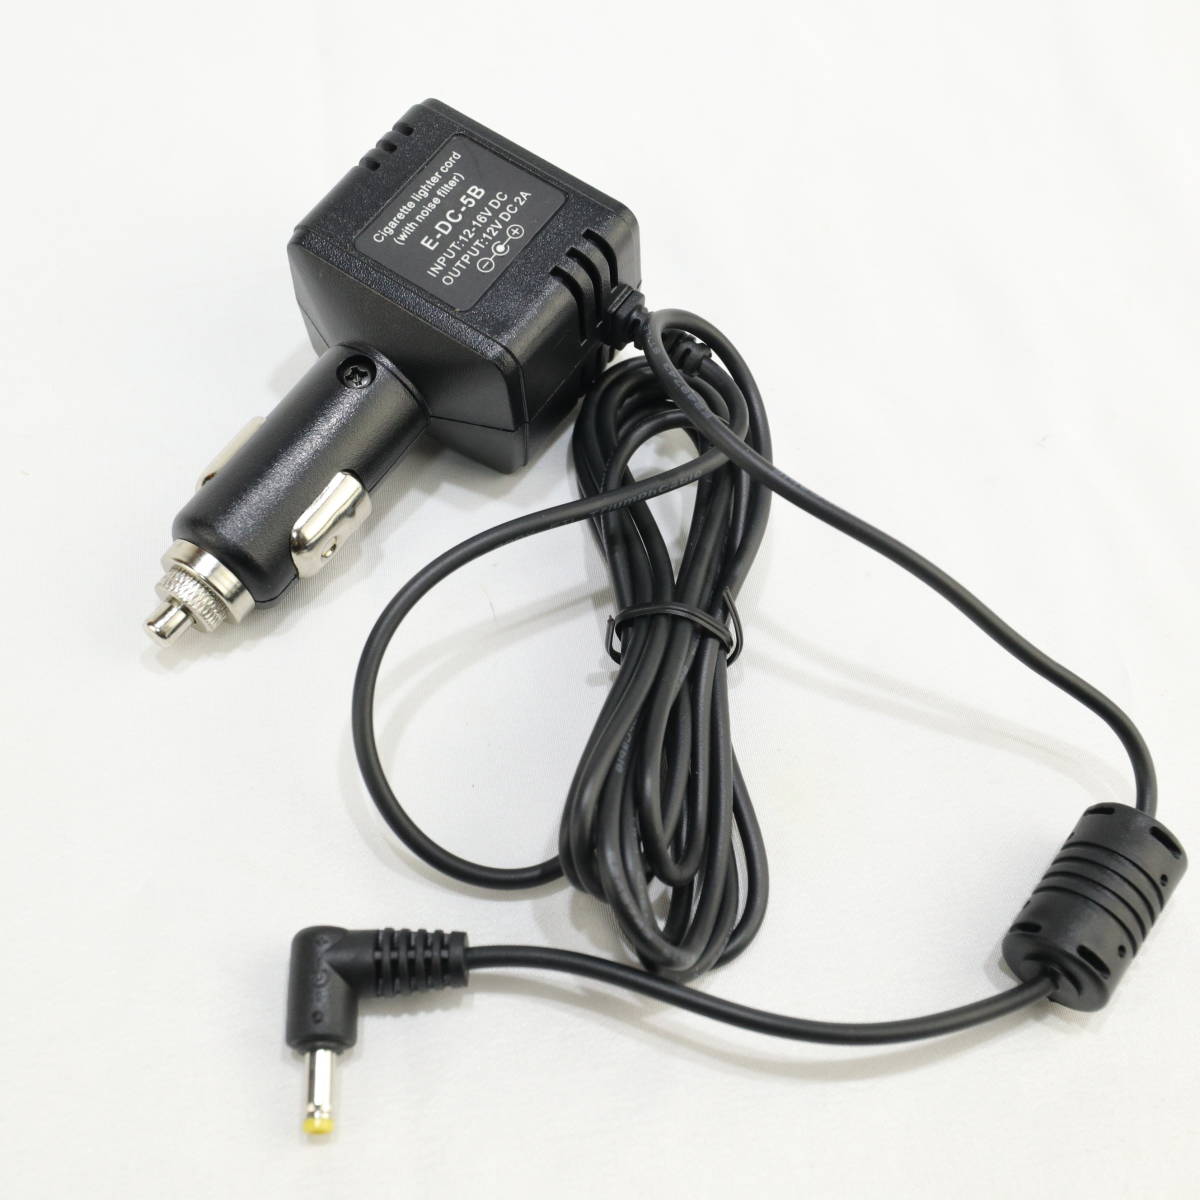 [ free shipping ] Yaesu VX-5/VX-6/VX-7 mobile transceiver for charge correspondence cigar lighter adaptor in car charge . recommendation 